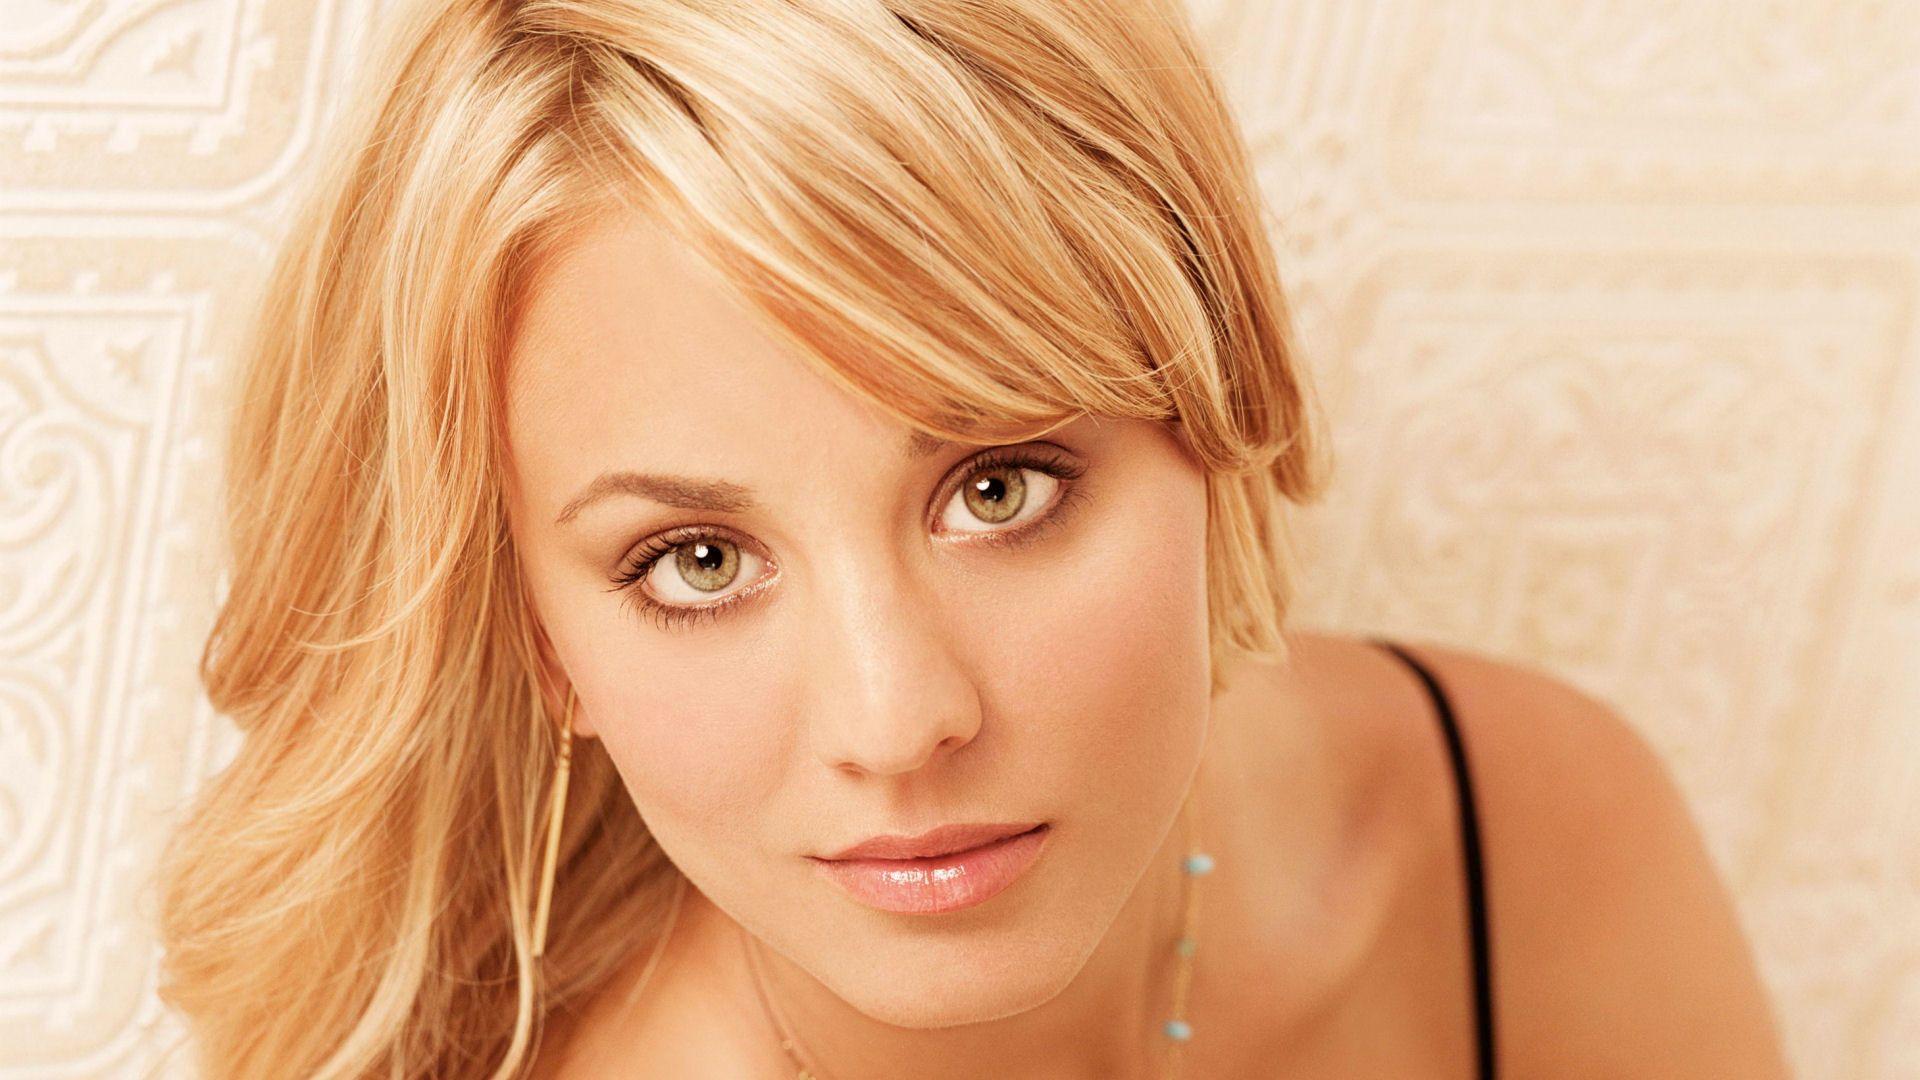 Download Kaley Cuoco Wallpaper 18692 1920x1080 px High Resolution